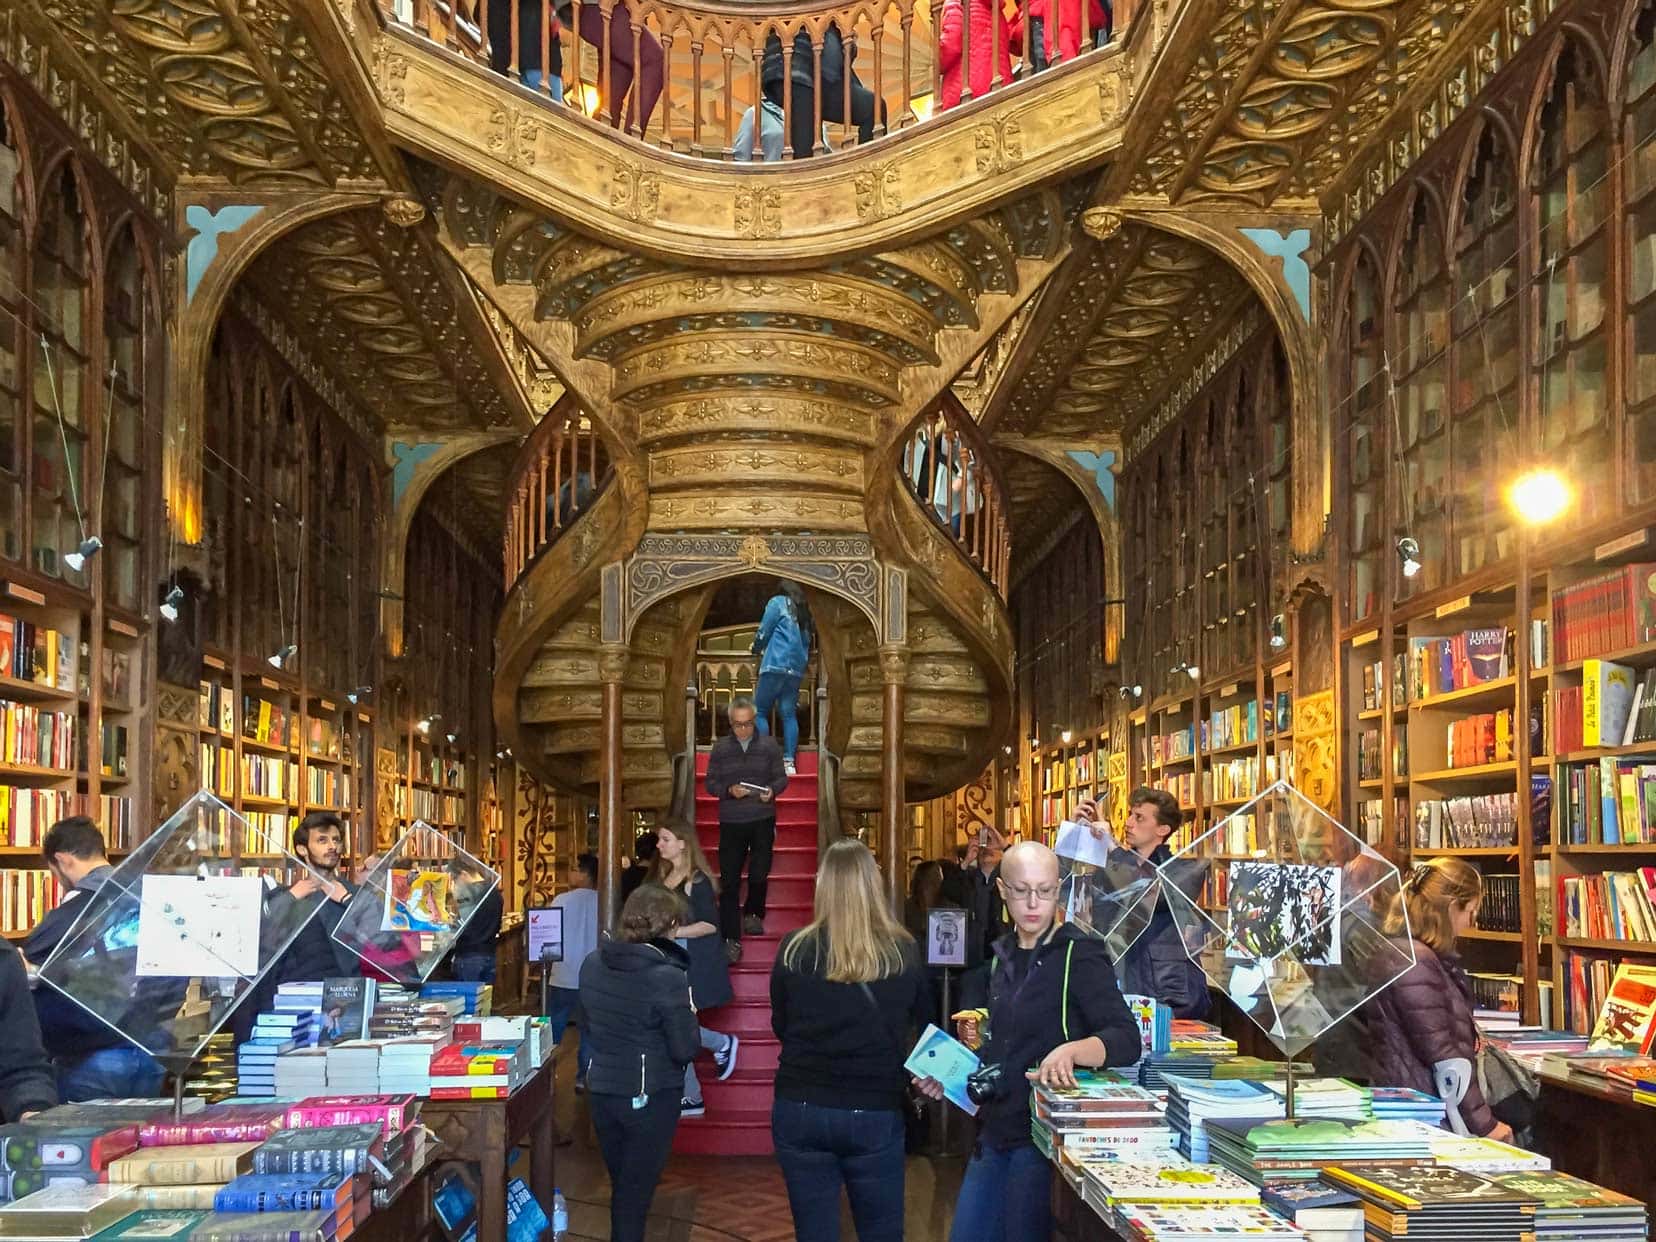 One of the oldest and most beautiful bookshops in Portugal, Livraria Lello